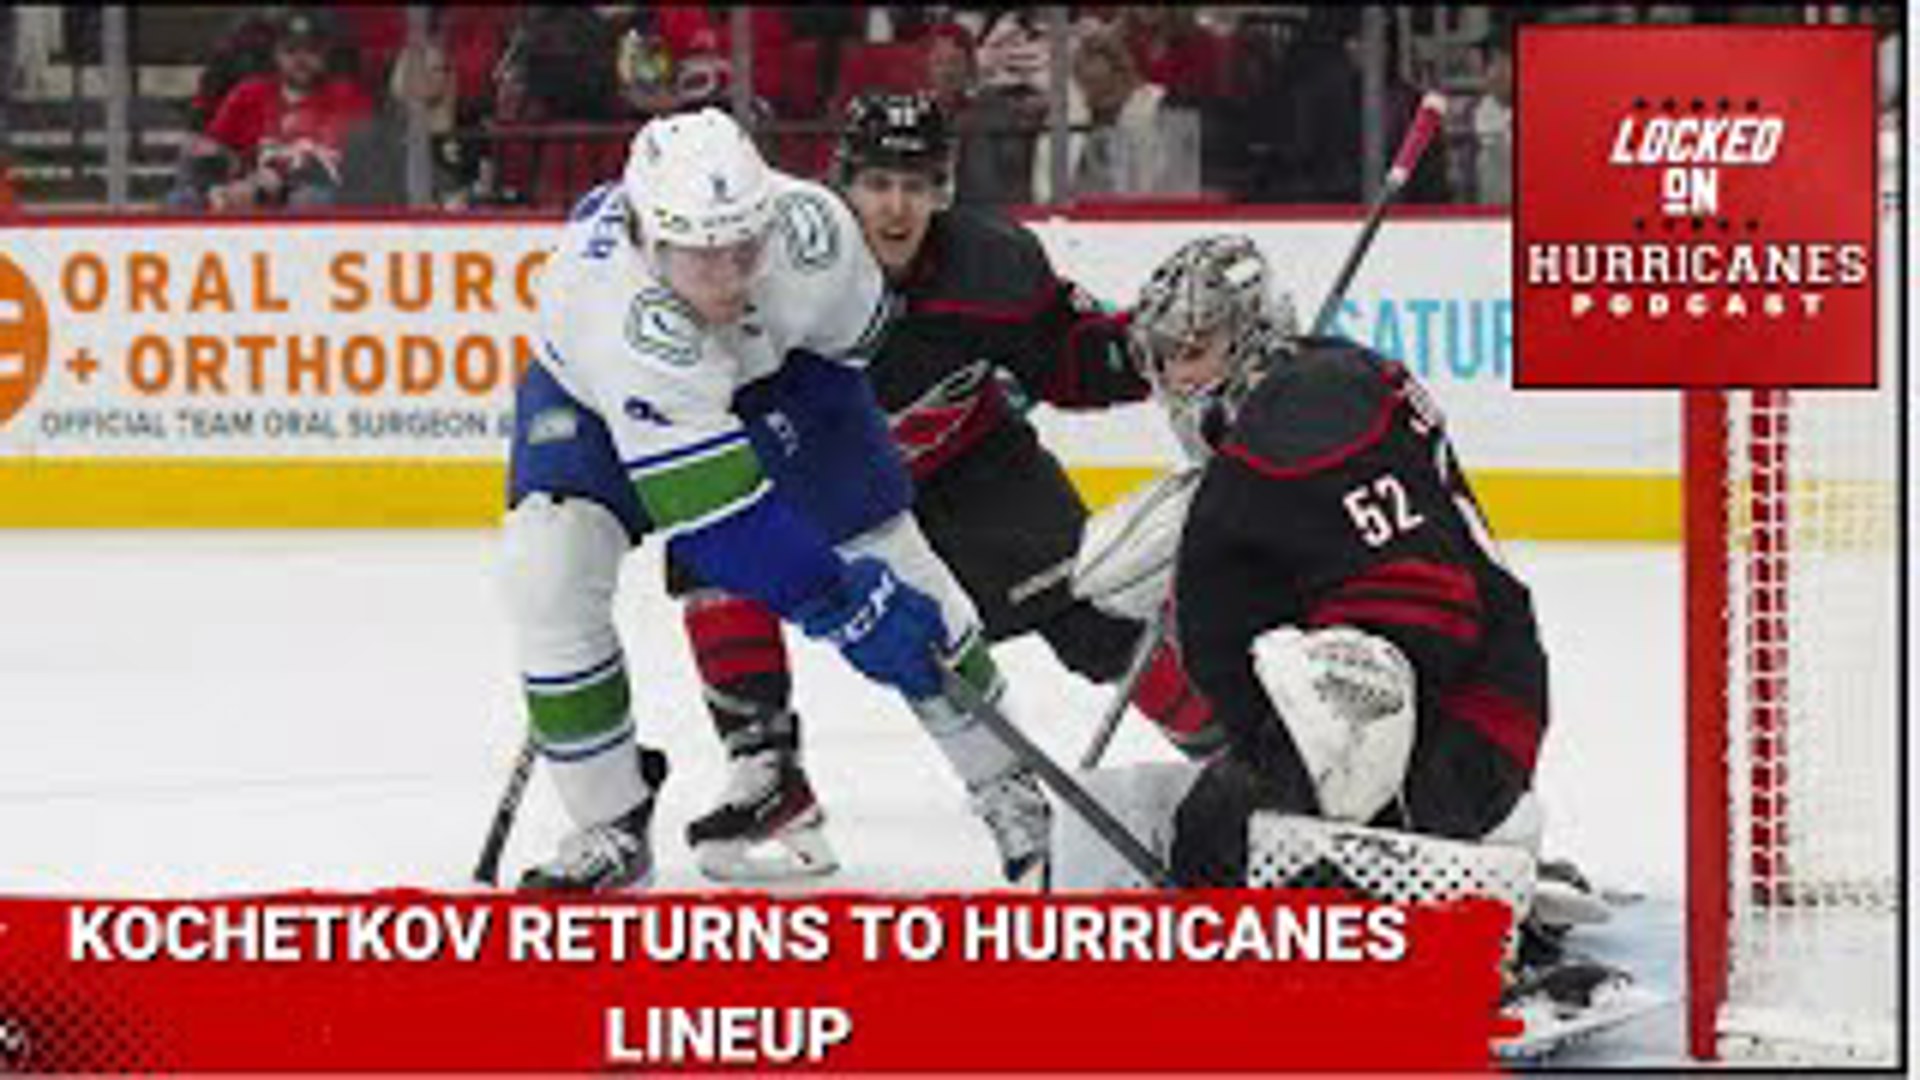 Goalie Pyotr Kochetkov returned to the NHL lineup against the Flyers.  That and more on Locked On Hurricanes.